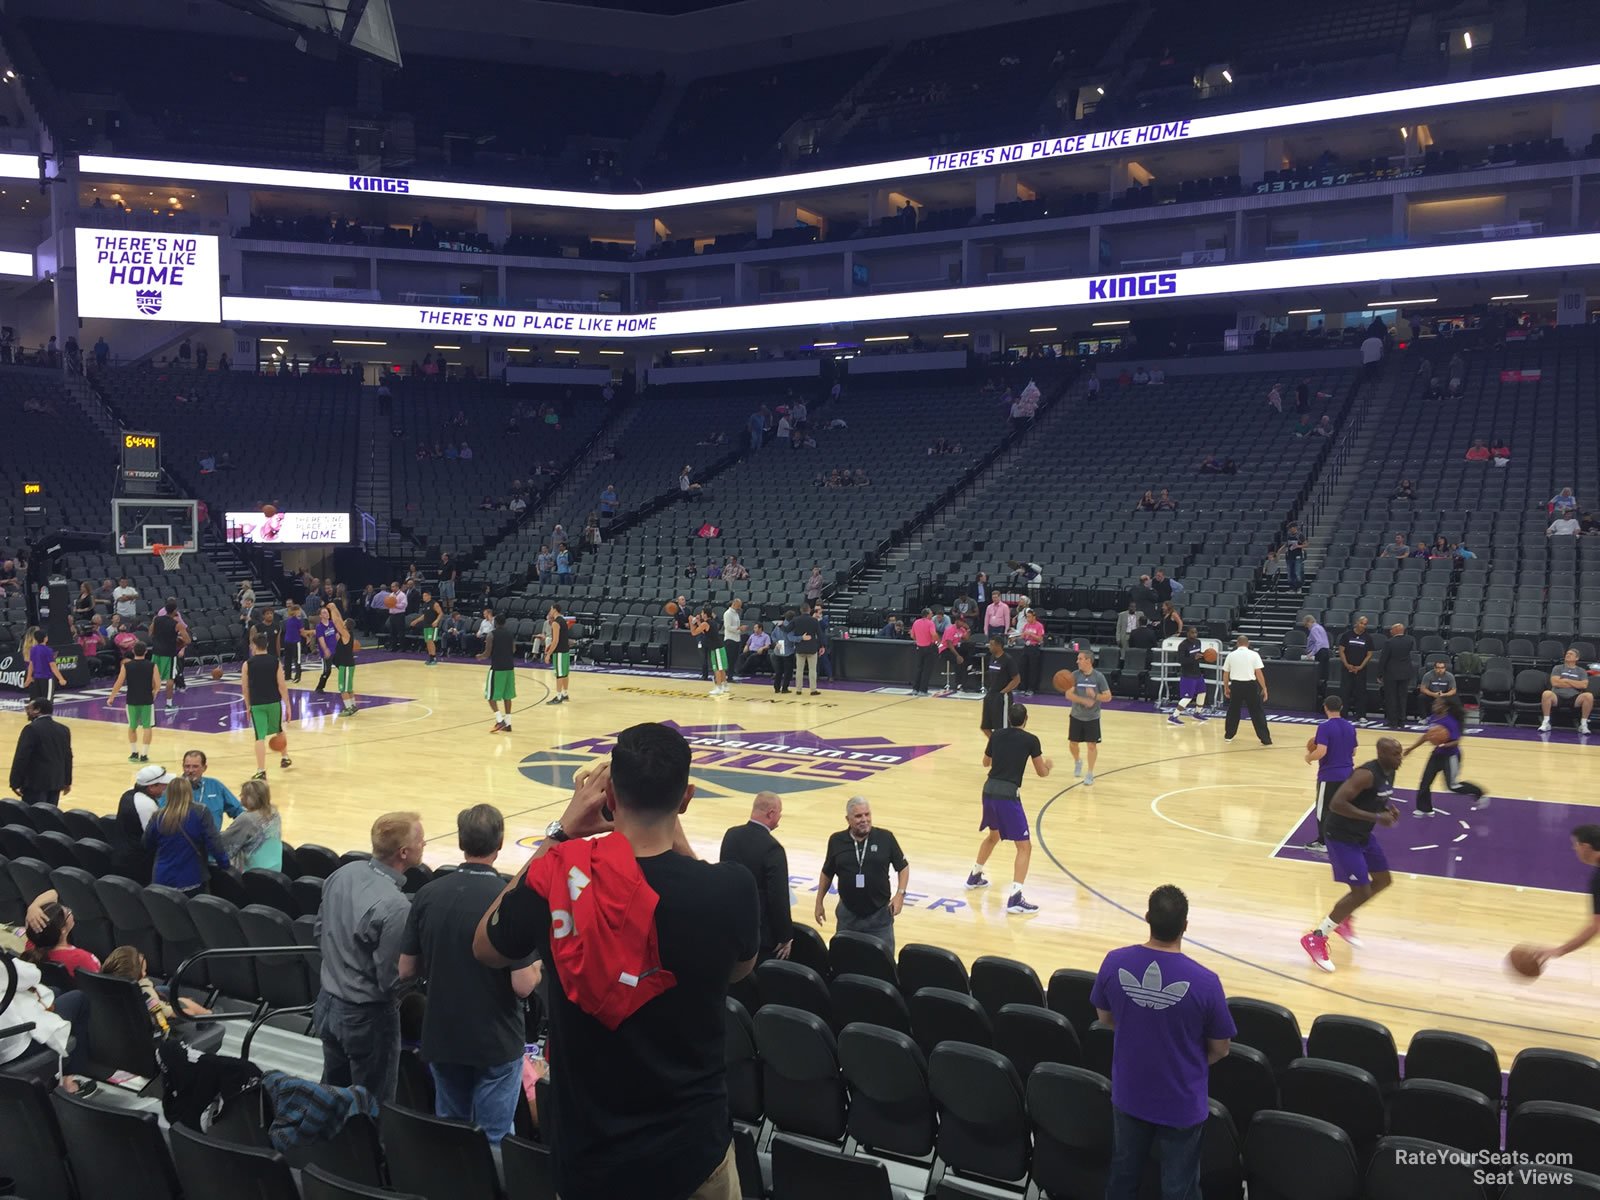 section 119, row dd seat view  for basketball - golden 1 center